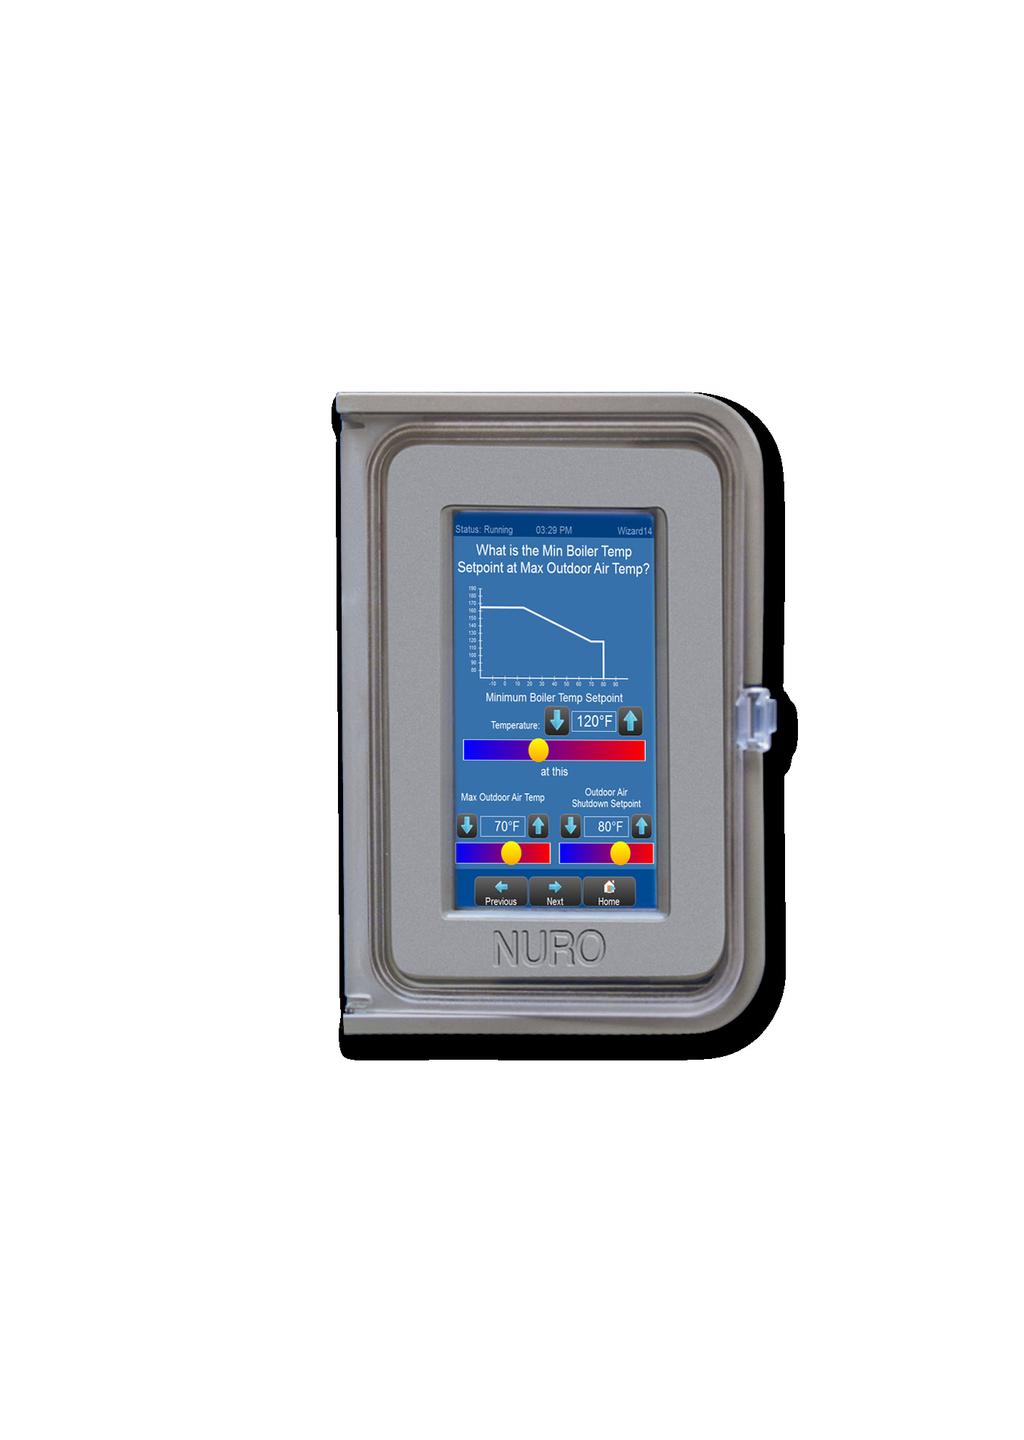 EASY TO USE: Touch-screen interface provides simple step-by-step navigation for set-up, maintenance, custom configurations, efficiency, help and more.